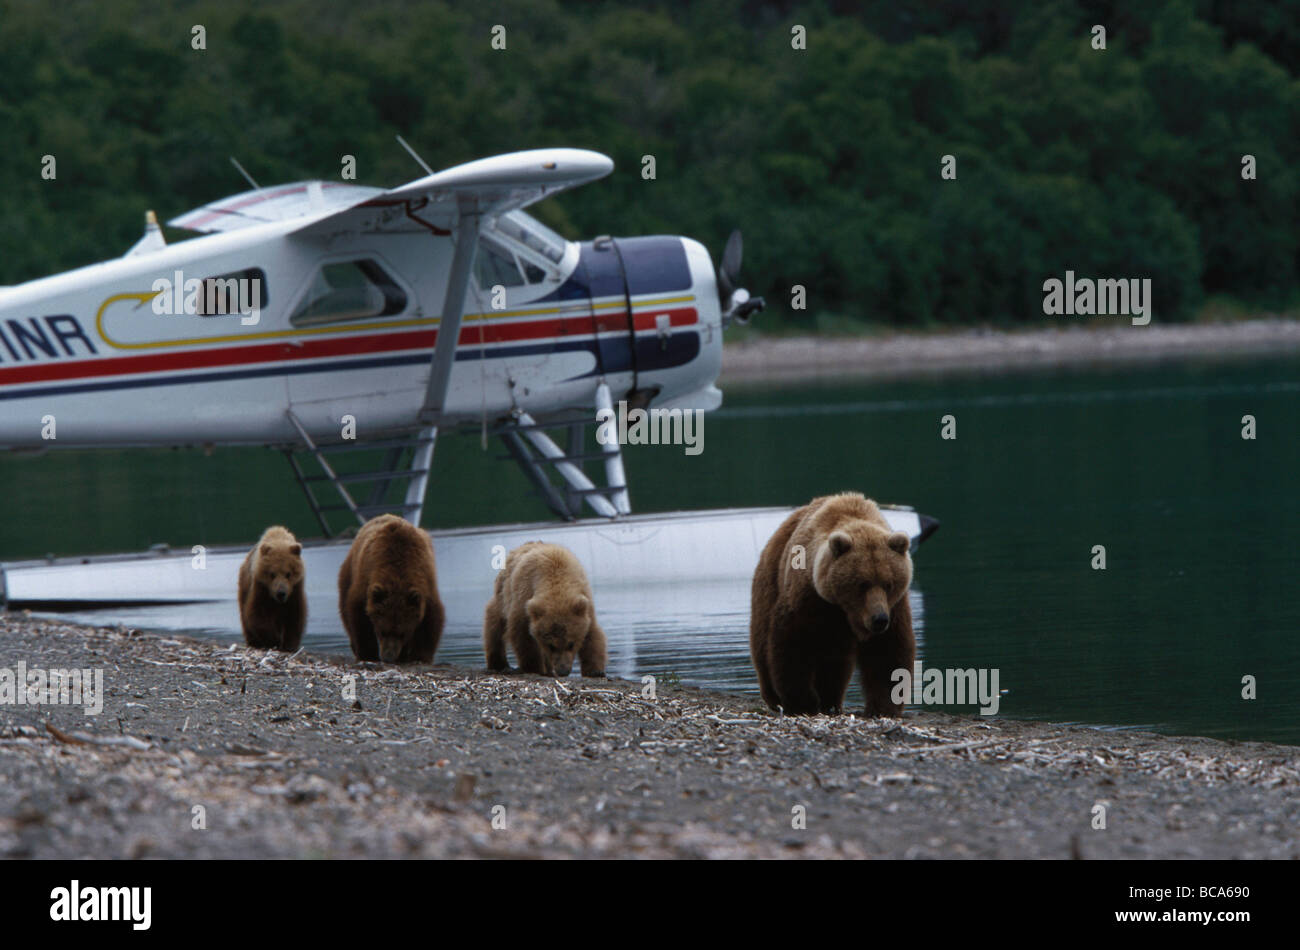 Brown bear, grizzly with cubs, Ursus Arctos, seaplane in the background, Katmai National Park, Alaska, USA Stock Photo